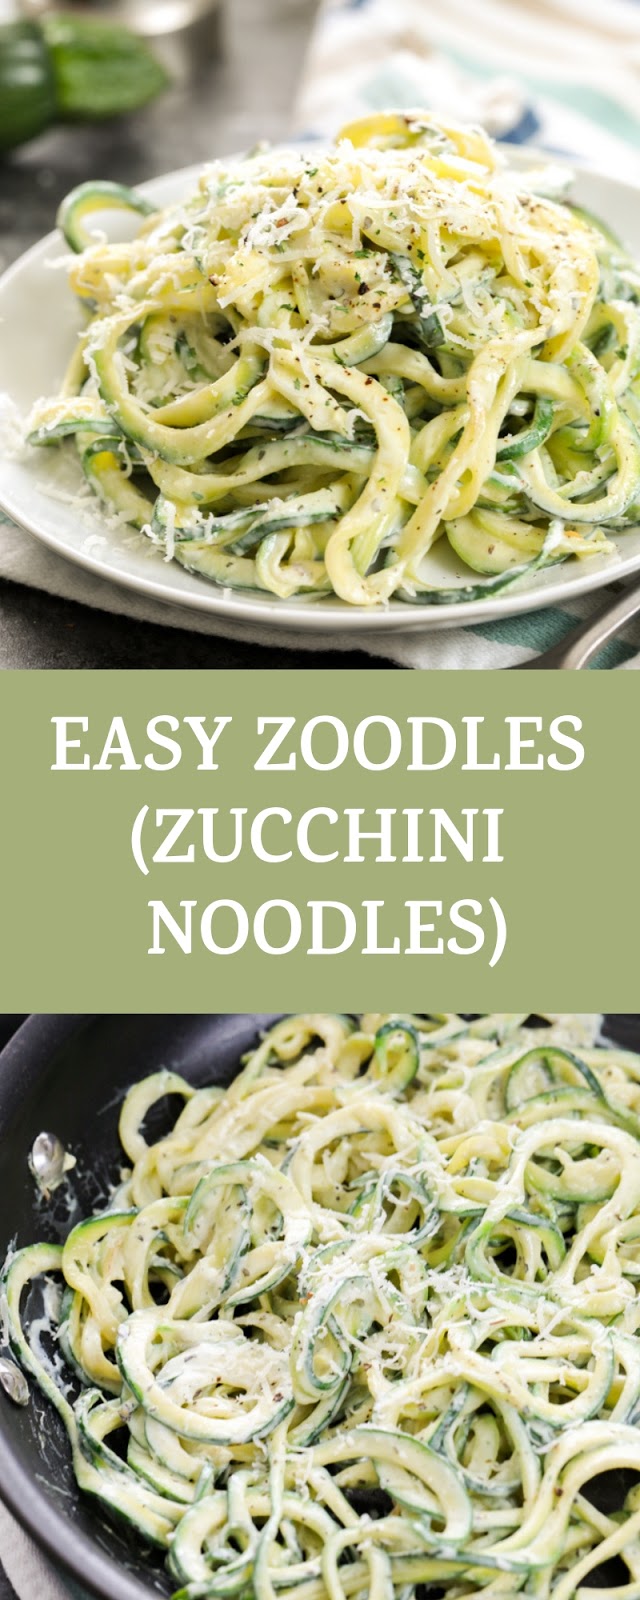 EASY ZOODLES (ZUCCHINI NOODLES)